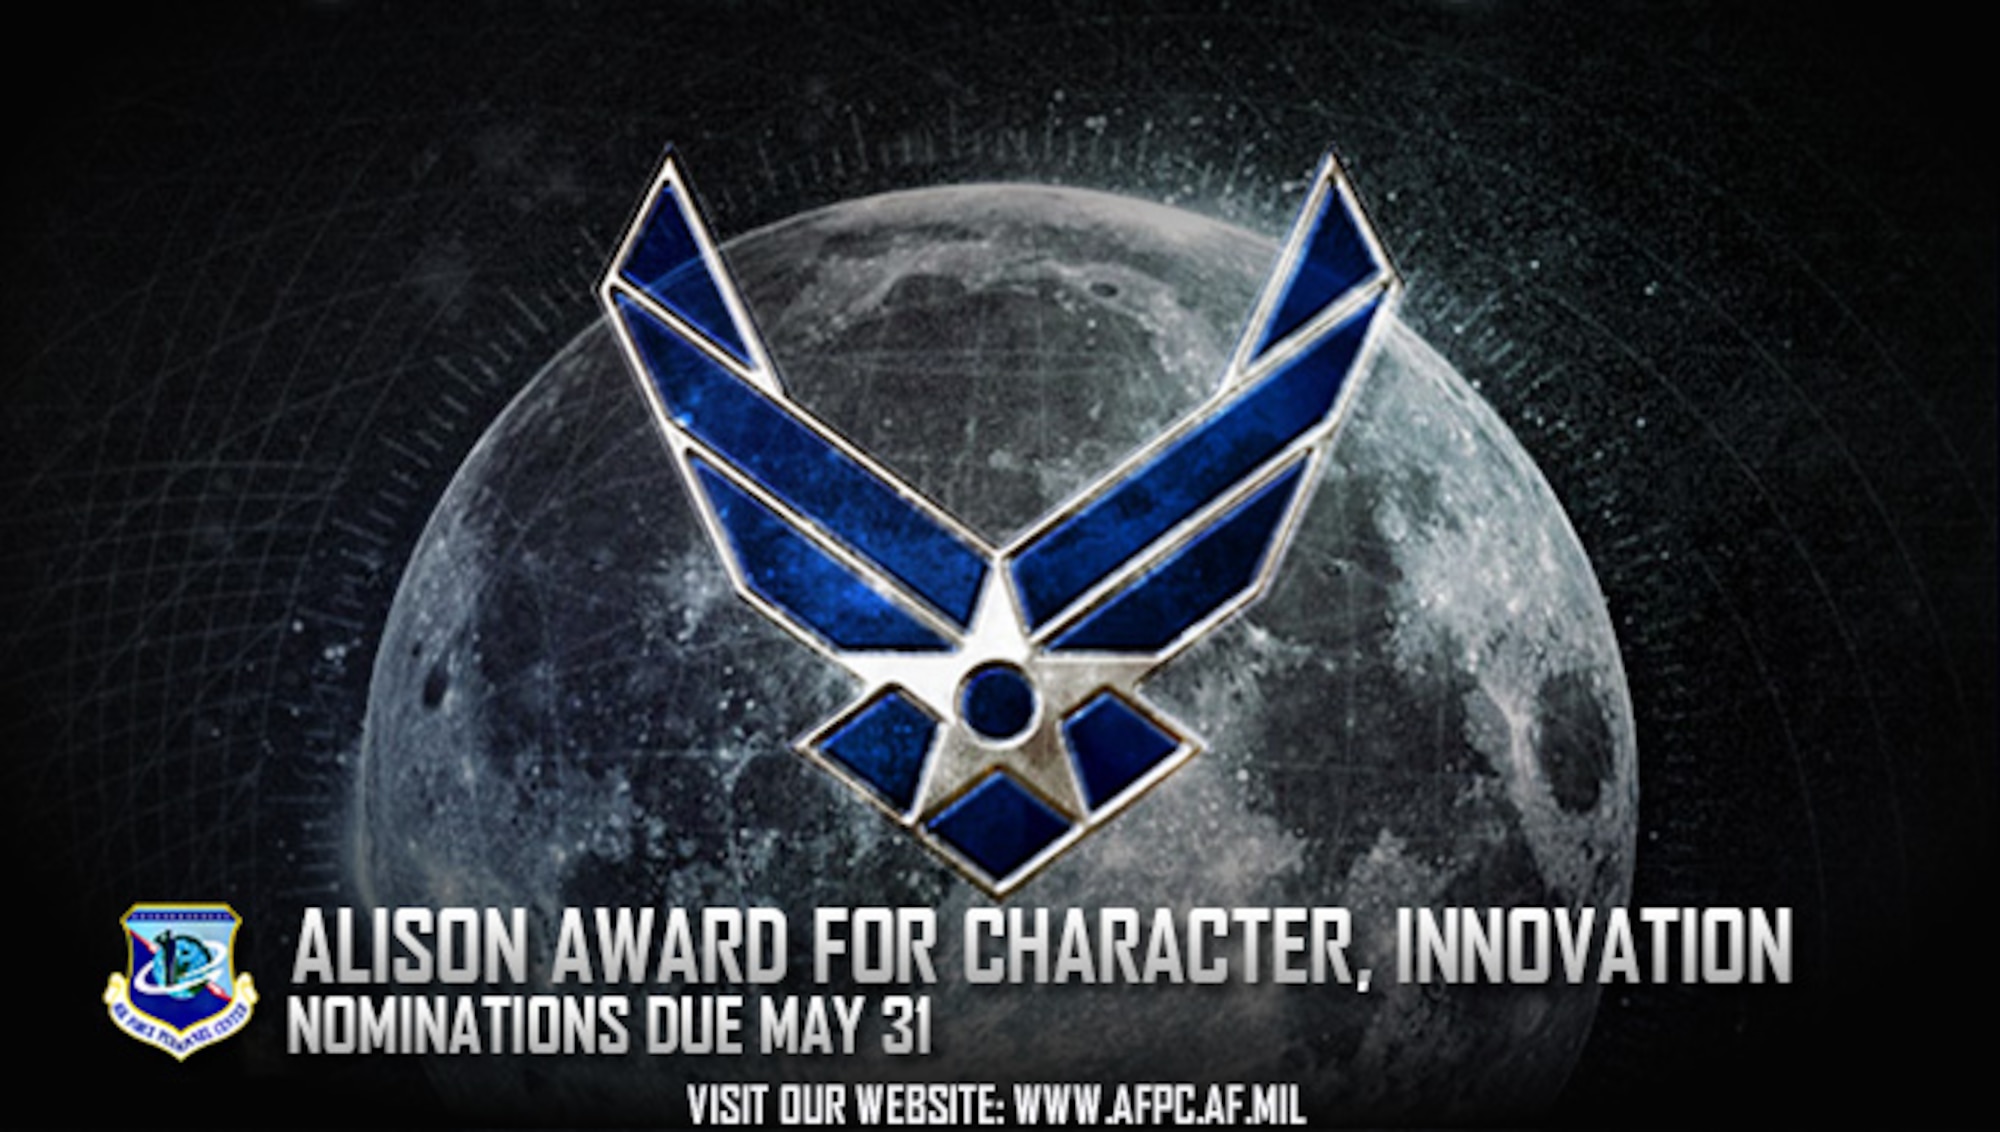 Air Force officials are accepting nominations for the Alison Award for Character and Innovation. Nominations are due to the Air Force Personnel Center by May 31, 2017. (U.S. Air Force graphic by Staff Sgt. Alexx Pons) 